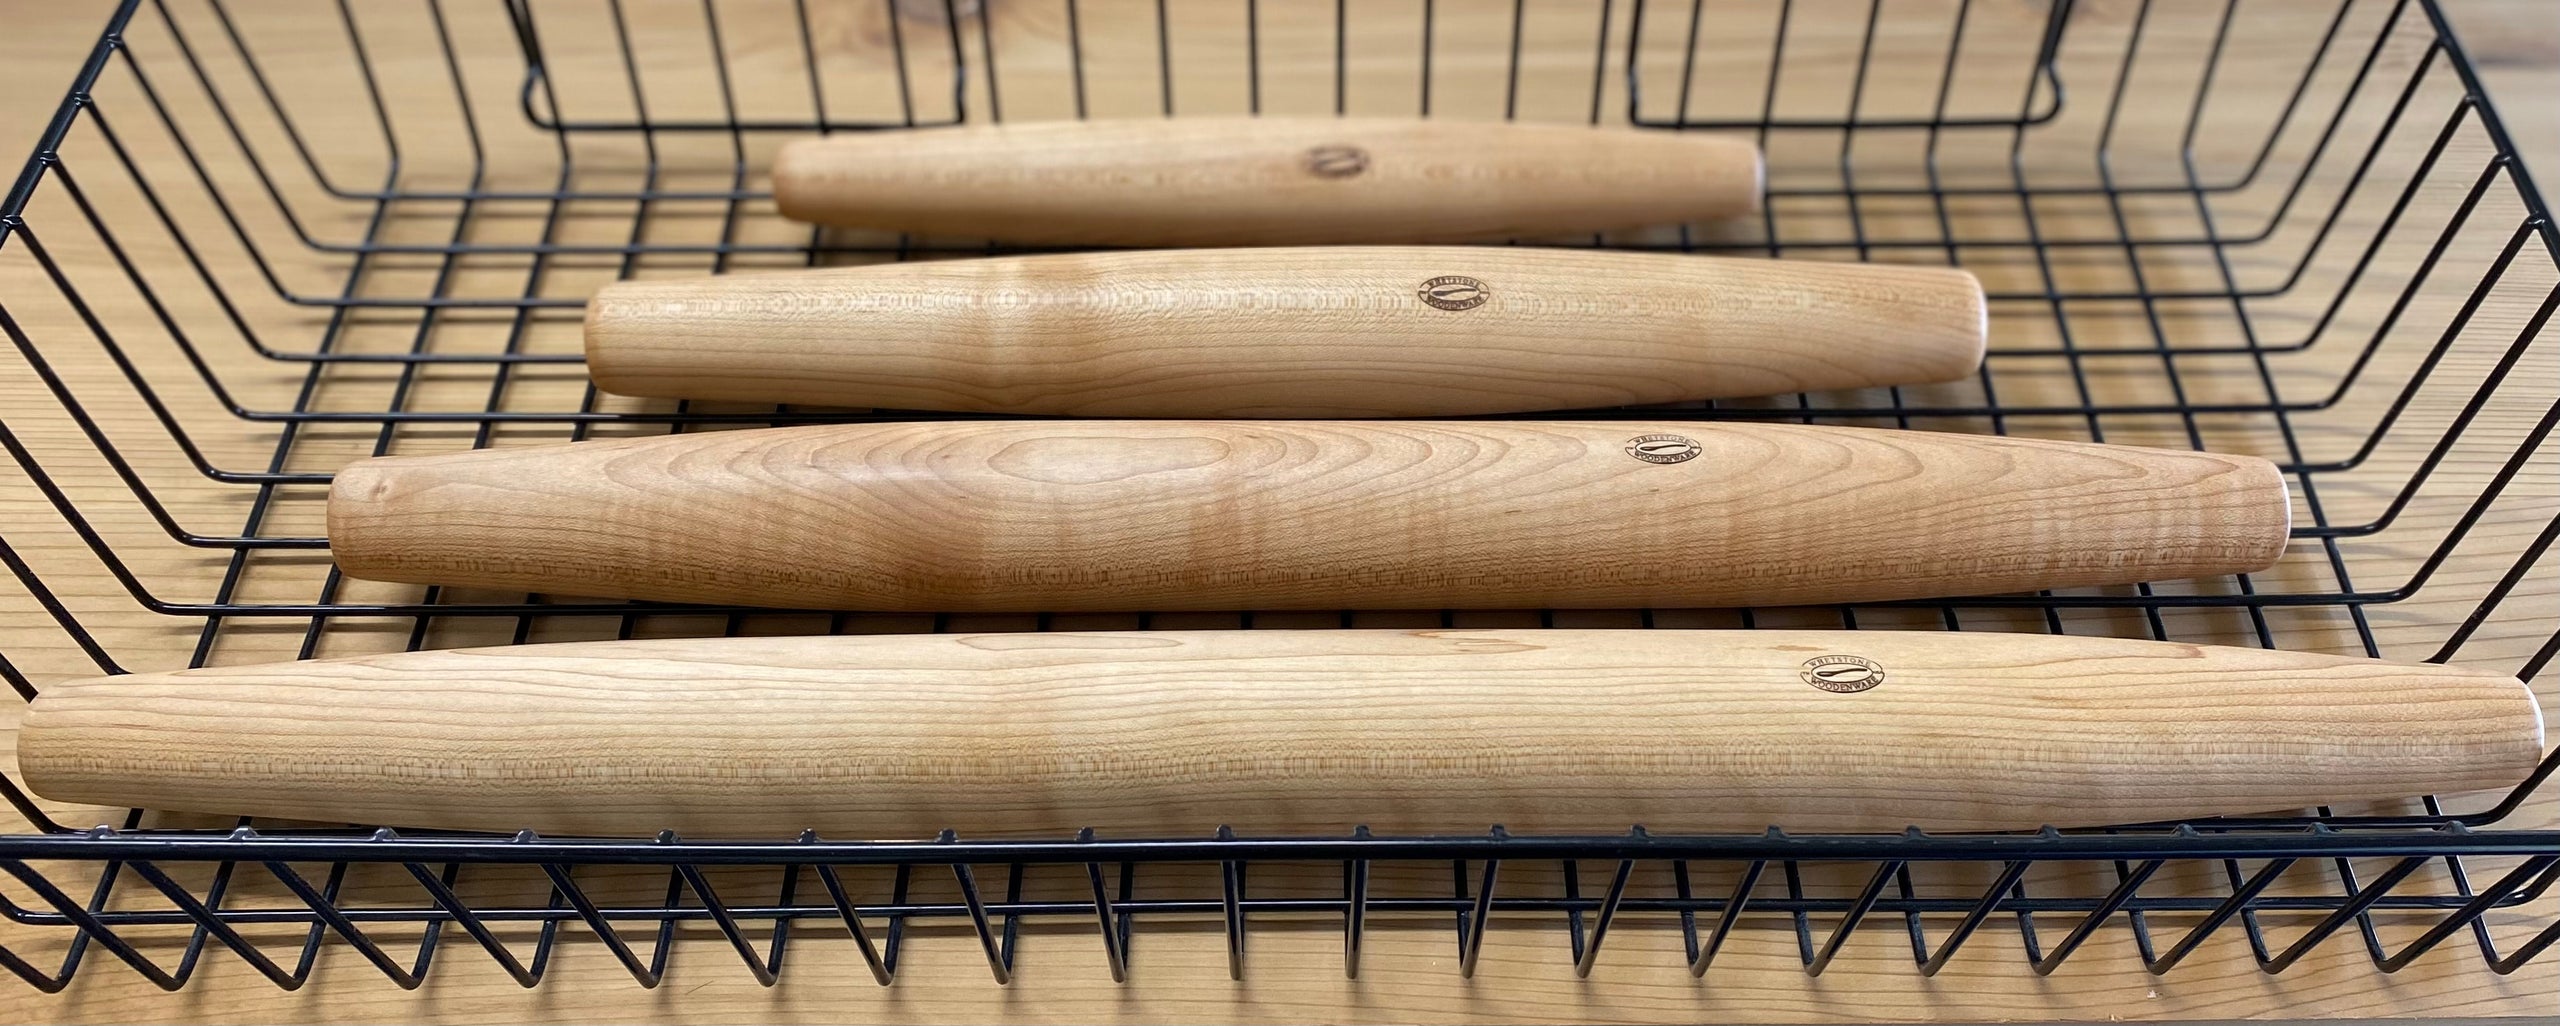 Rolling Pin,Wood 10 1/2 x 2 - The Ceramic Shop